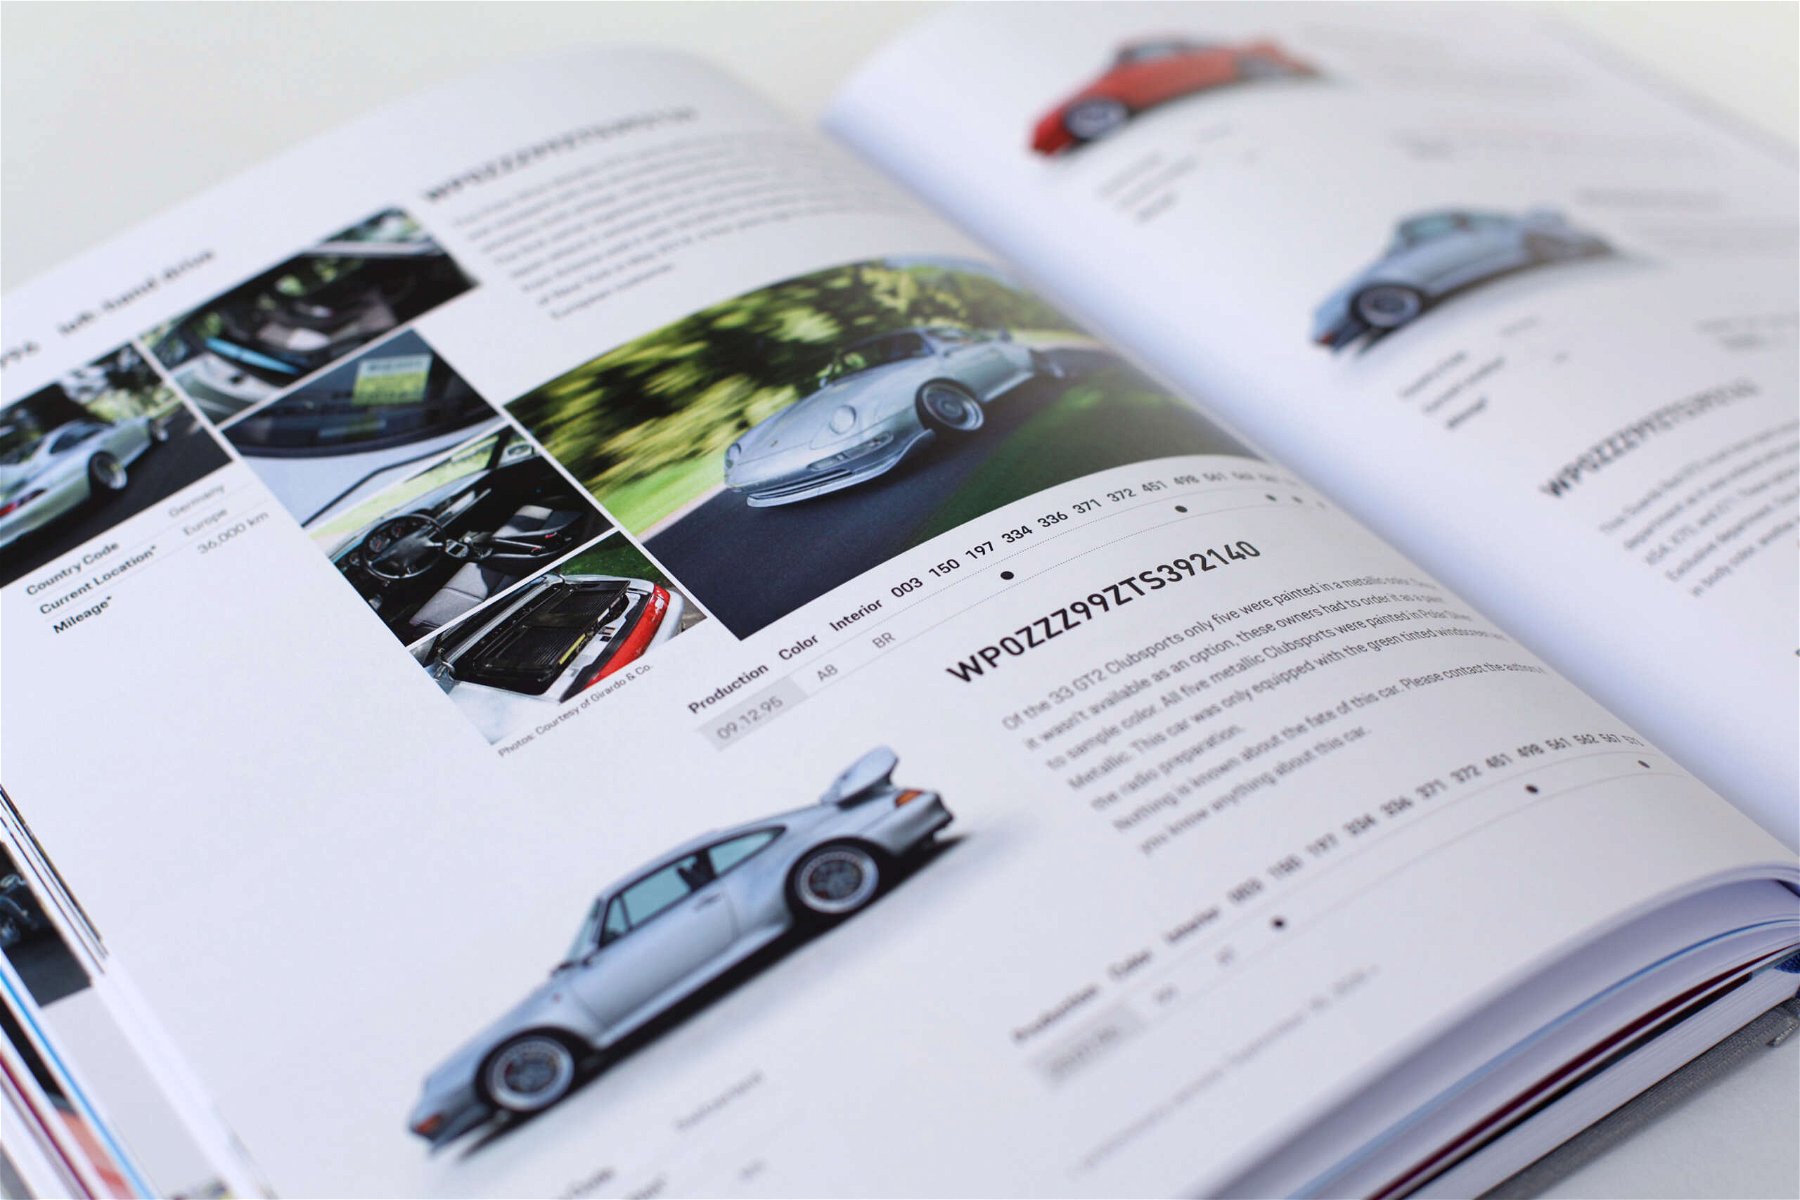 Book Review: 'Porsche Showroom Posters: The First 25 Years